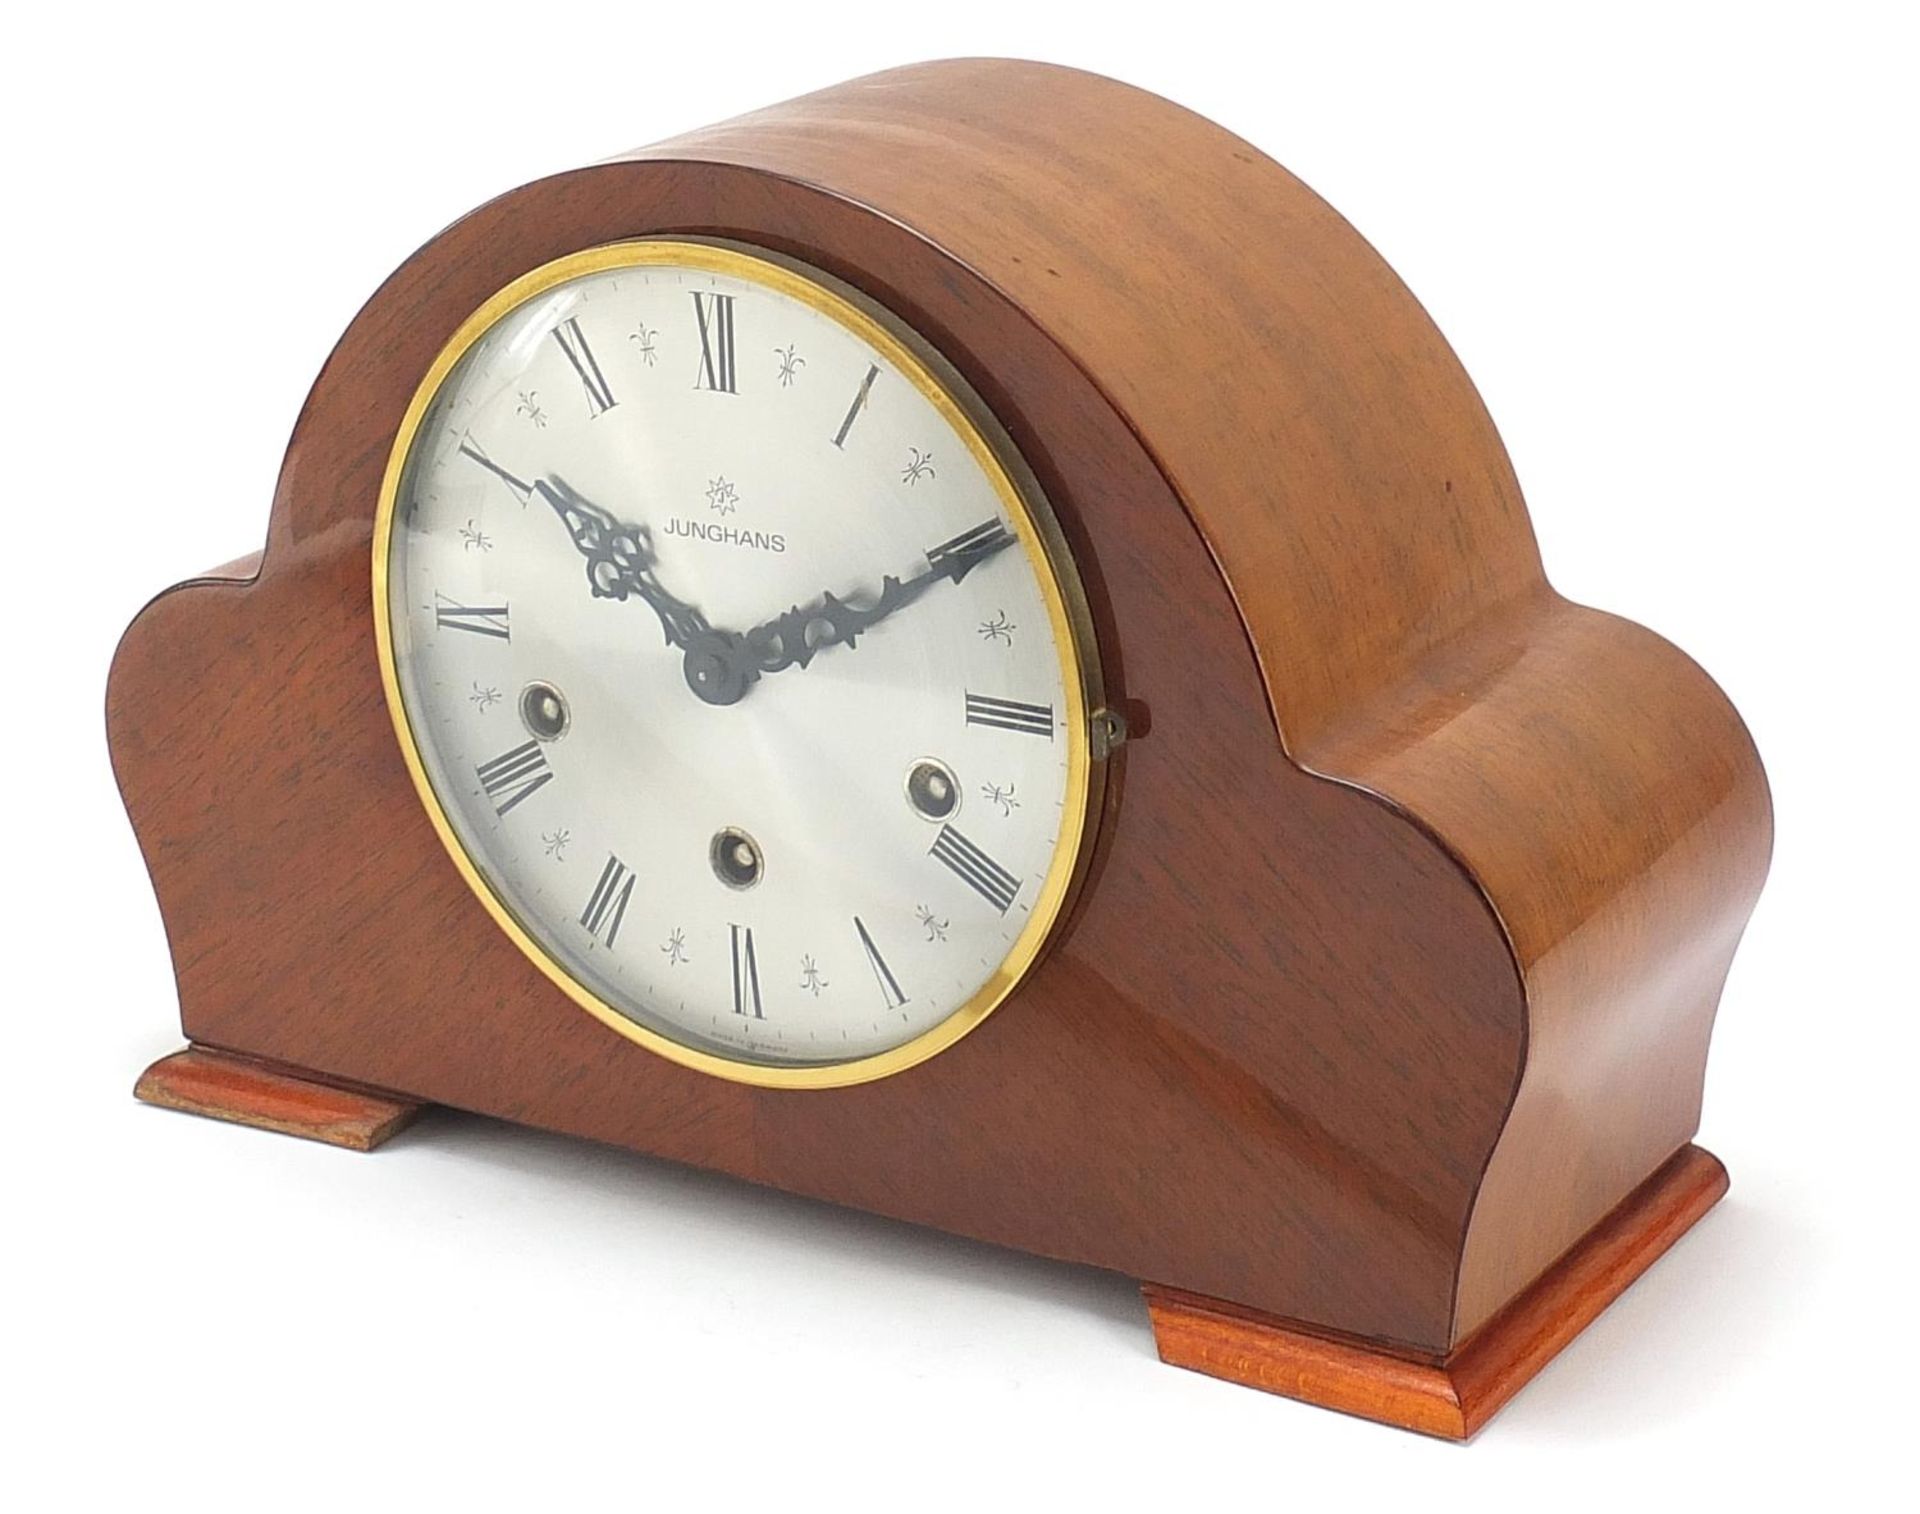 Junghans, German Art Deco style Westminster chiming mantle clock with Roman numerals, 30.5cm wide